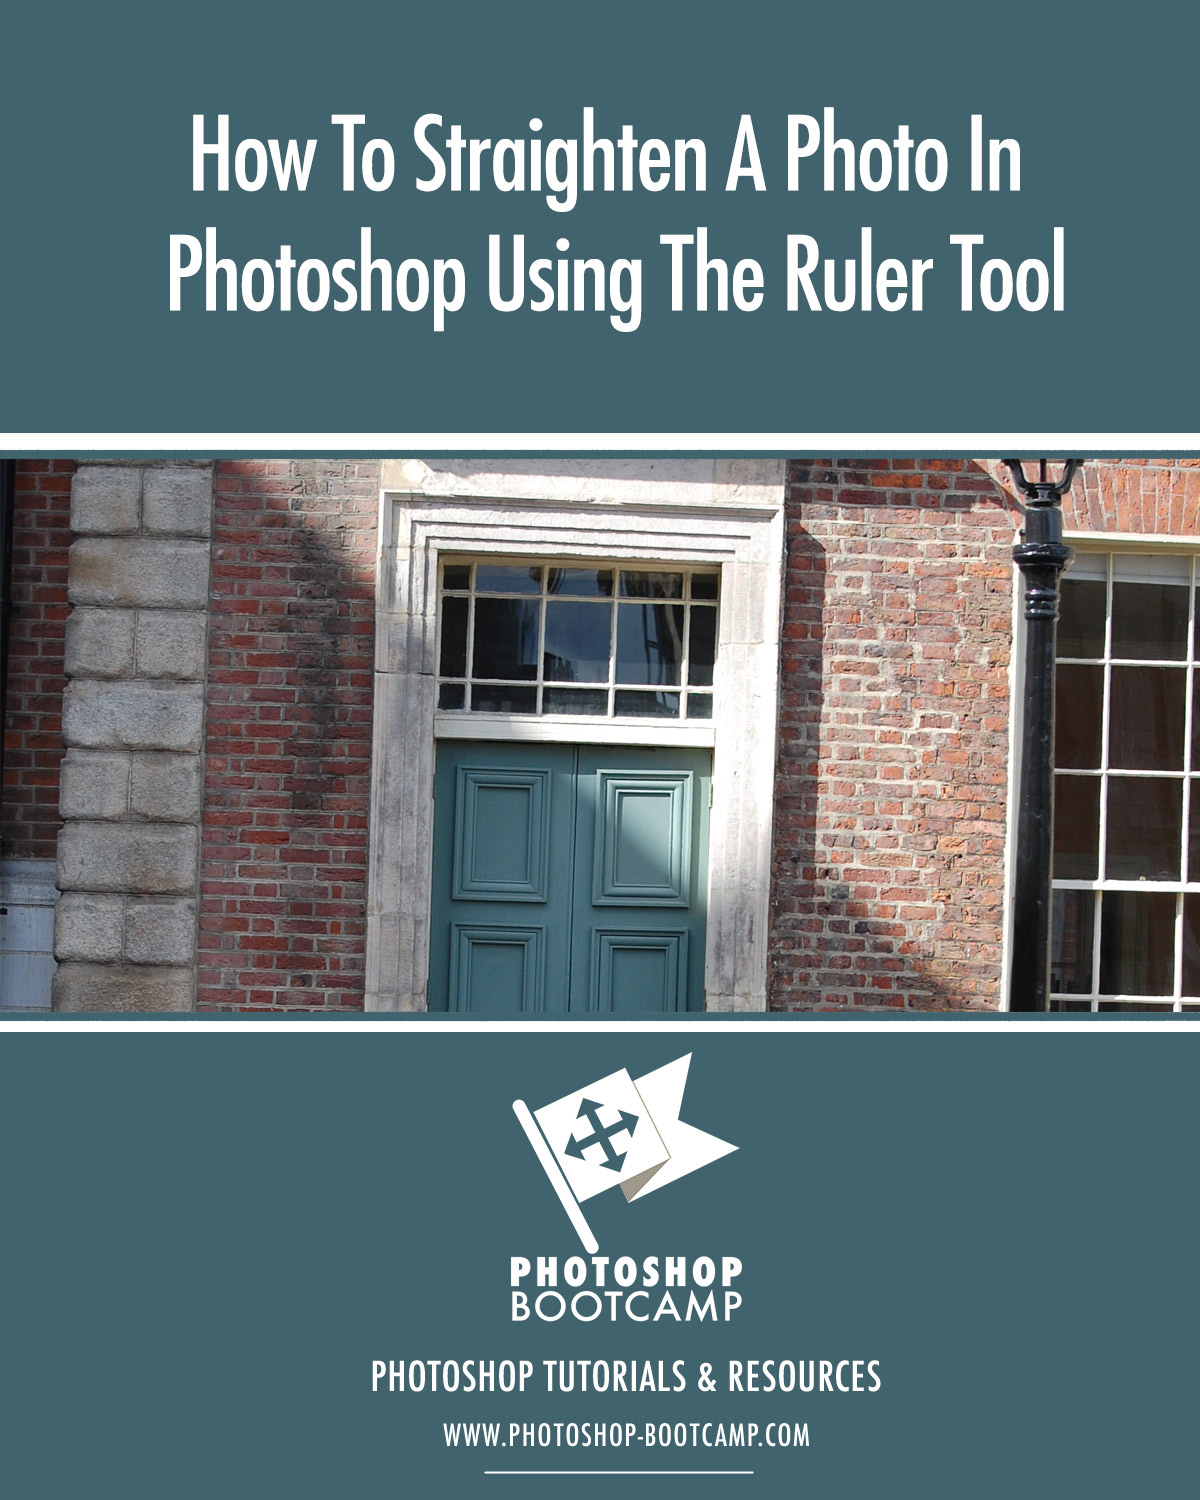 How To Straighten A Photo In Photoshop Using The Ruler Tool